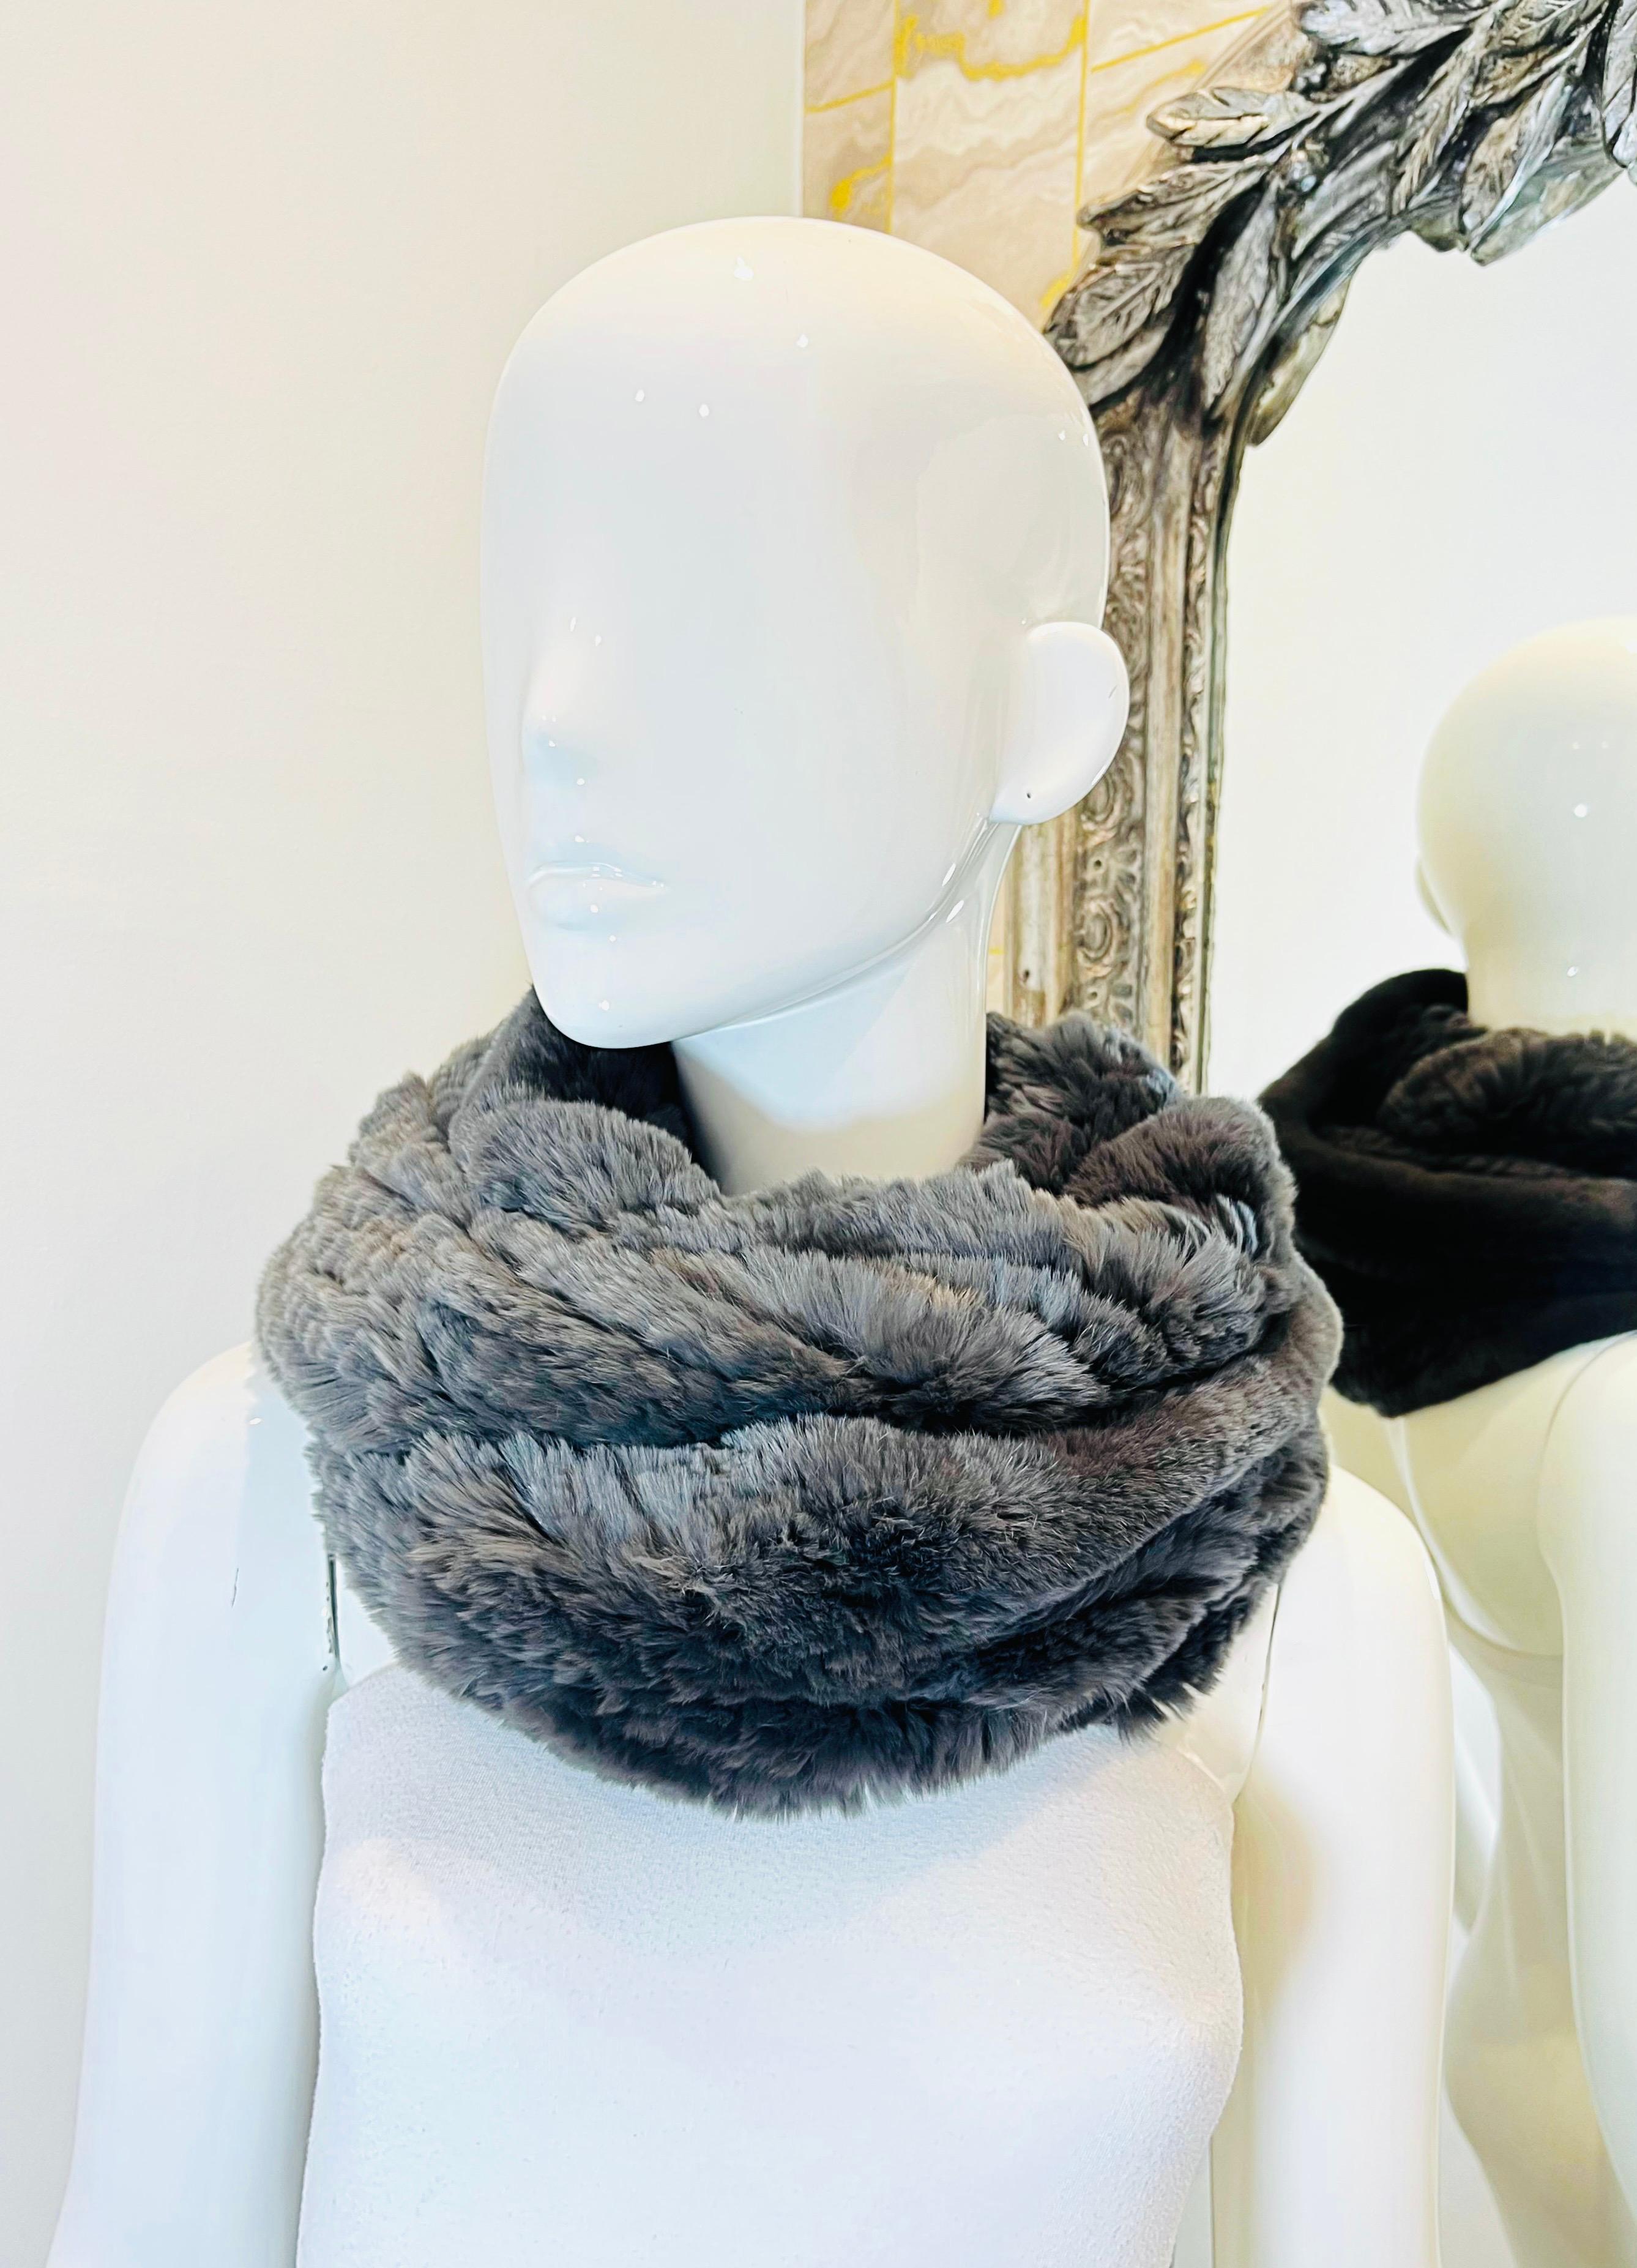 Harrods Rex Rabbit Snood Scarf

Grey scarf crafted from the most luxurious rex rabbit fur.

Featuring soft and dense feel, can be worn in various ways.

Size – One Size

Condition – Excellent

Composition – 100% Rex Rabbit

Comes with – Scarf Only